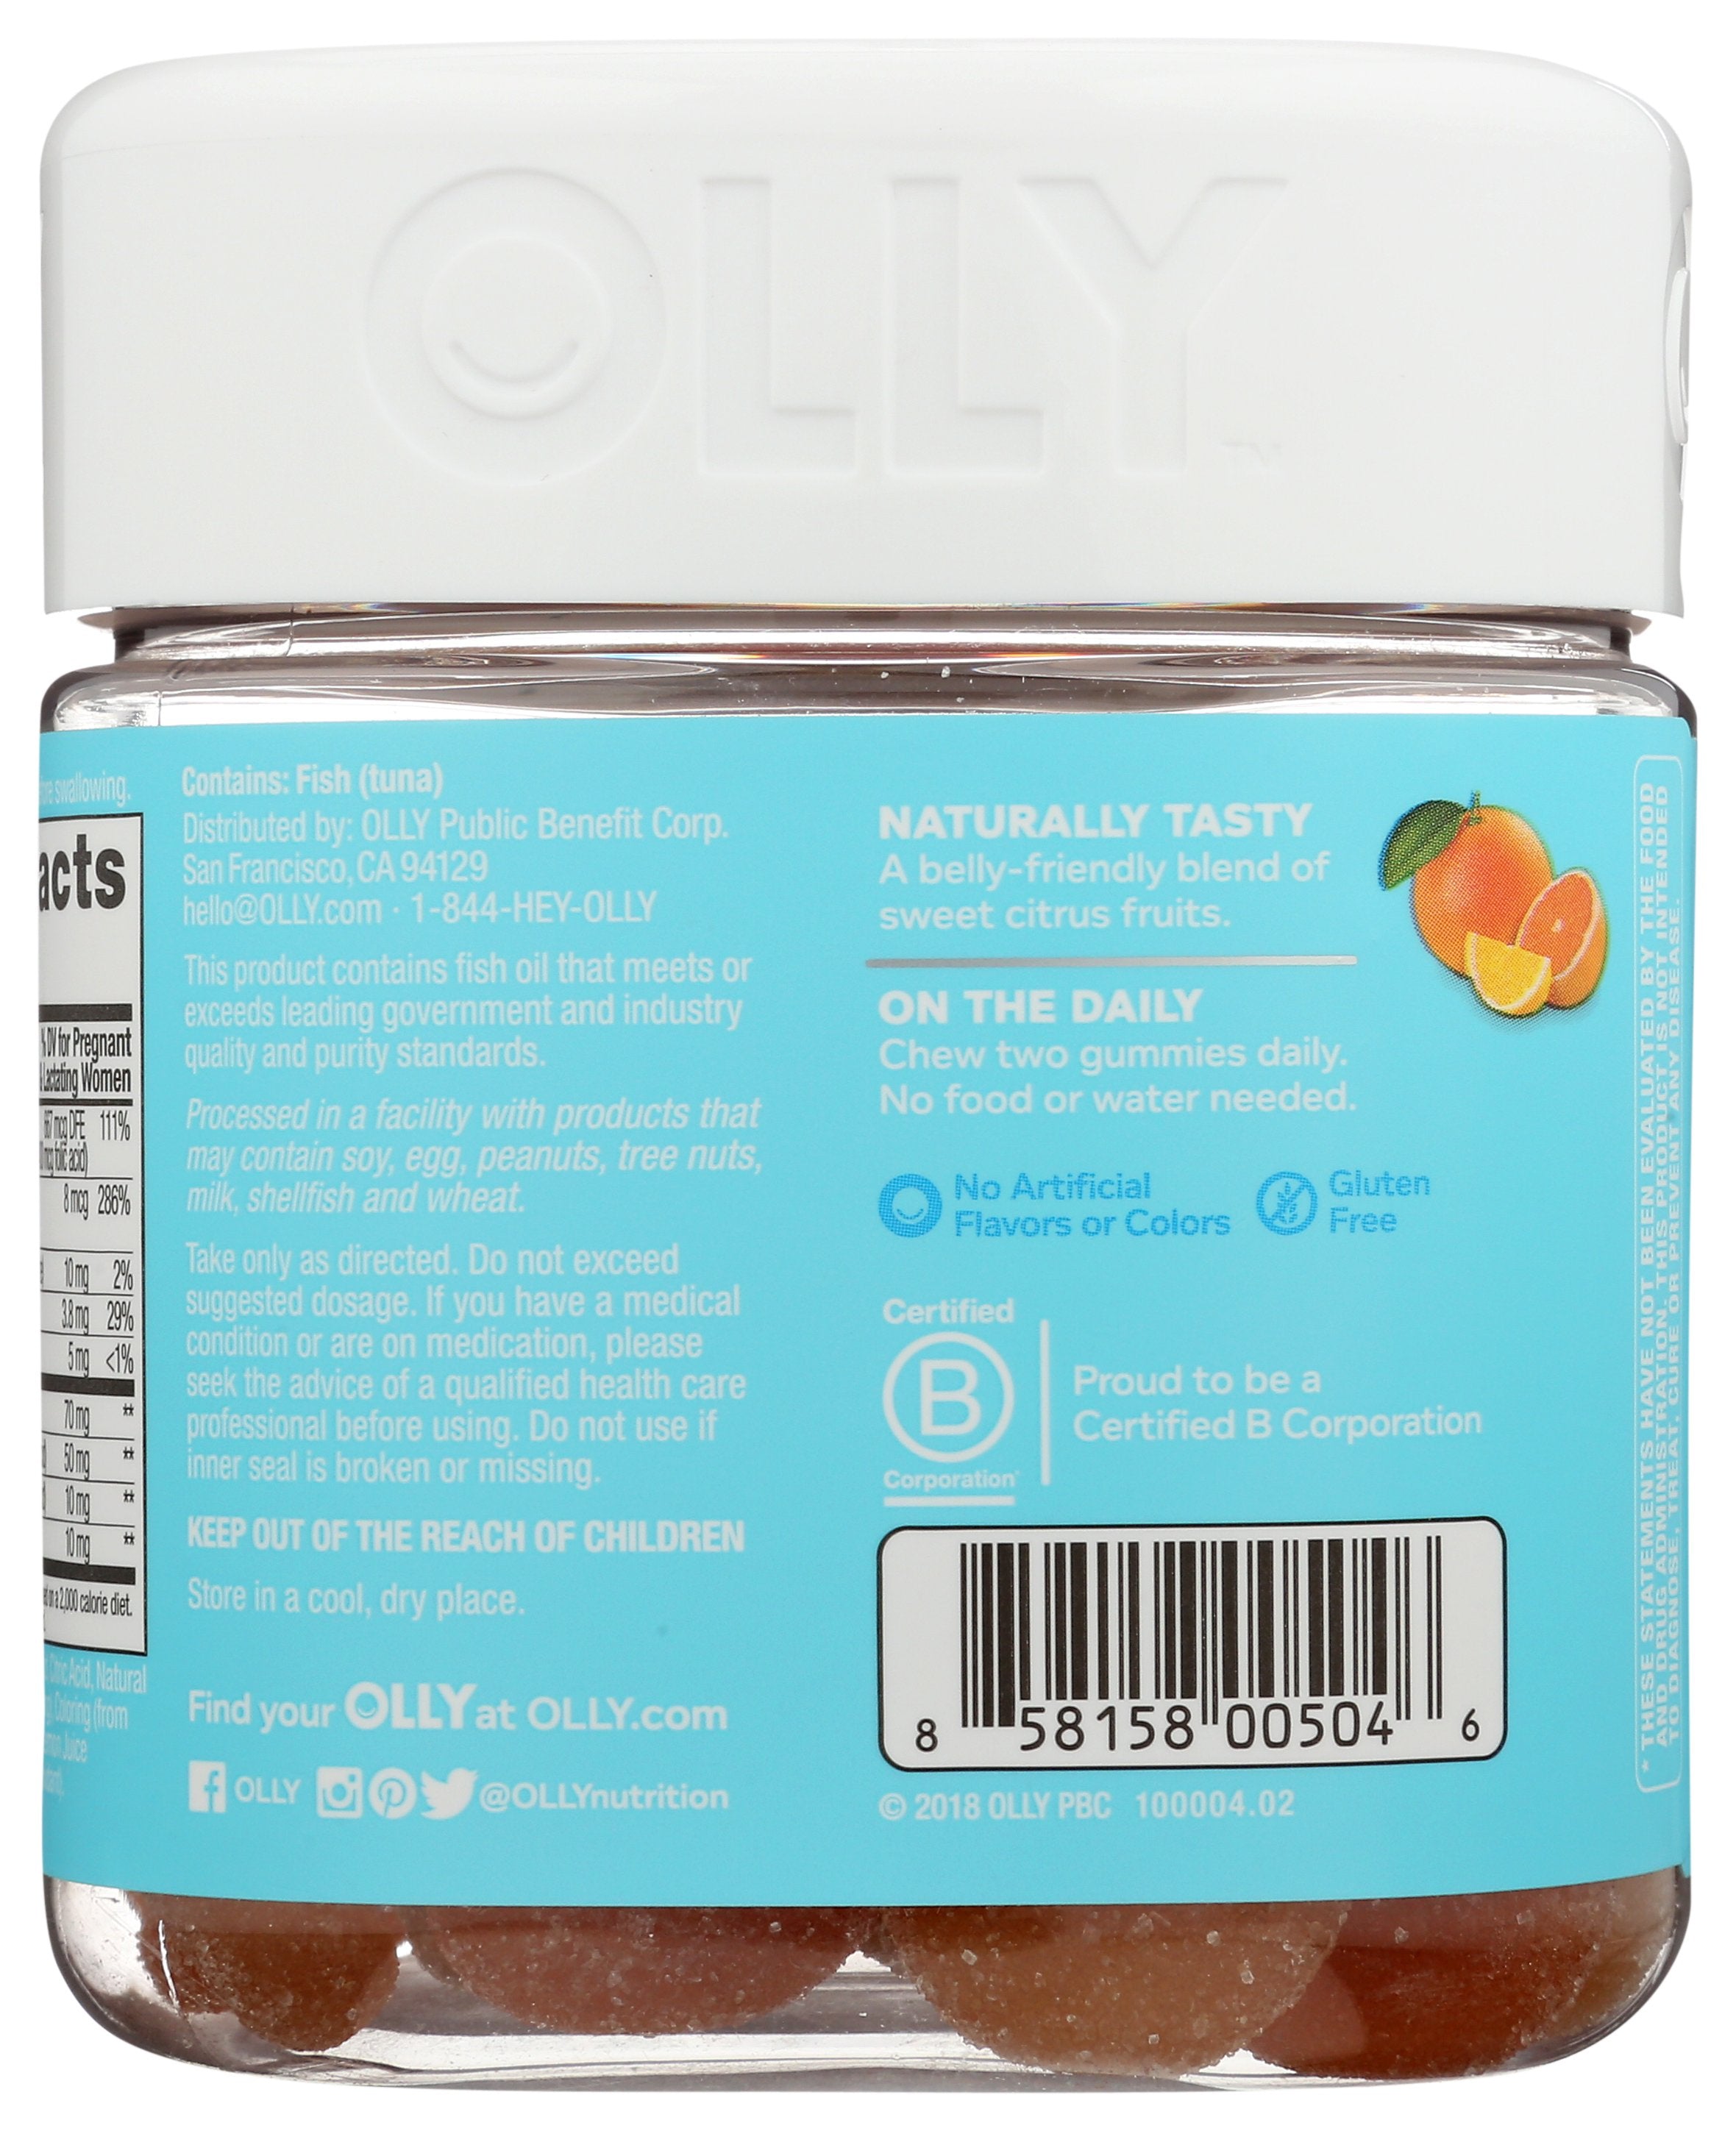 OLLY SUPPLEMENT PRENATAL - Case of 3